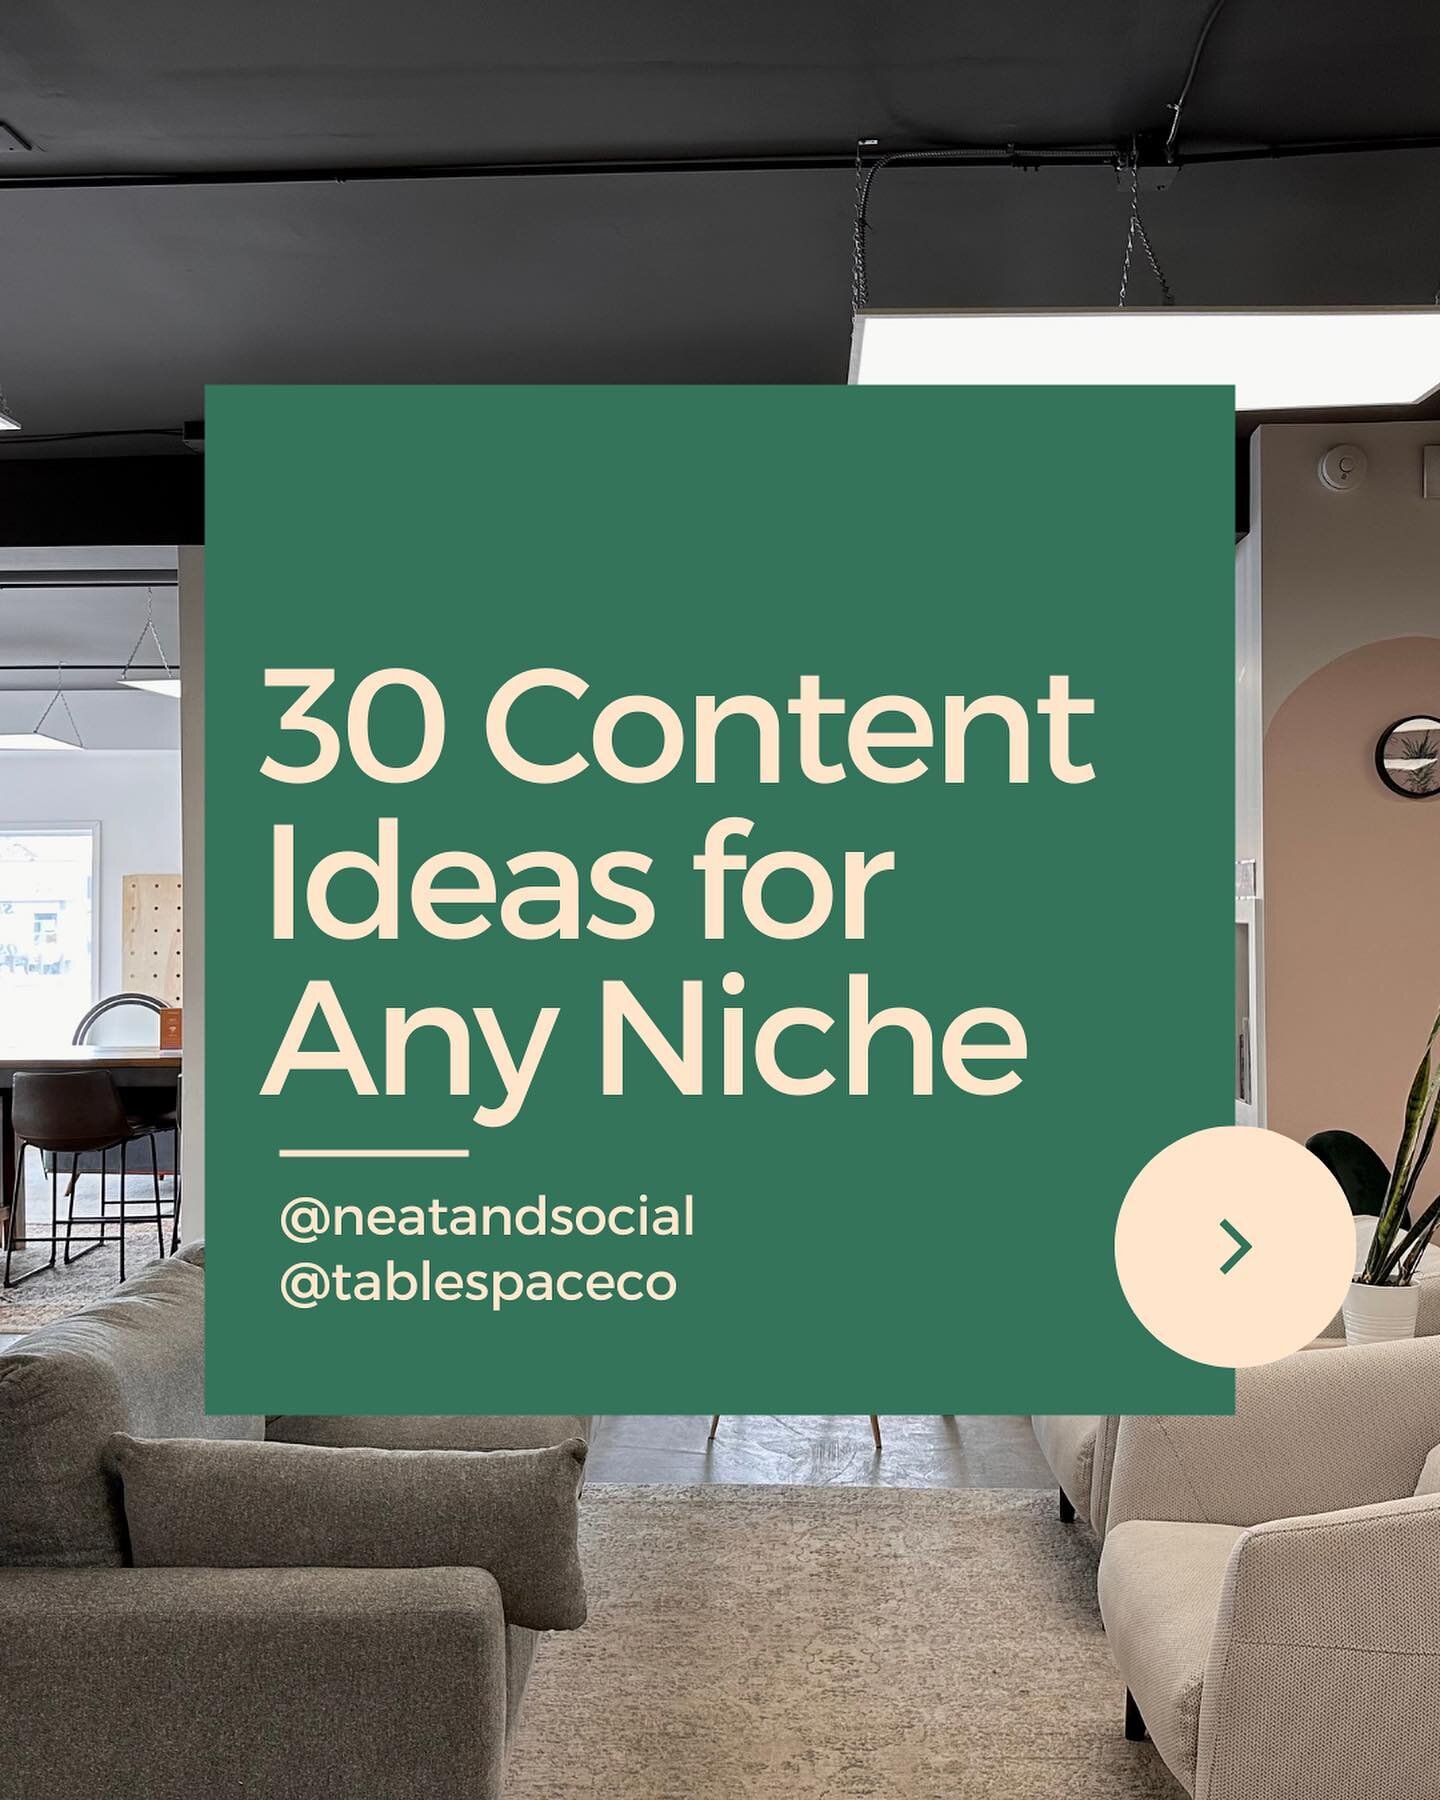 It's time to kick off your week with some fresh inspiration.

Throw these ideas in your bag of tricks to make your next post stand out.

If you like these, make sure to follow us for more. 😀

@tablespaceco
@neatandsocial